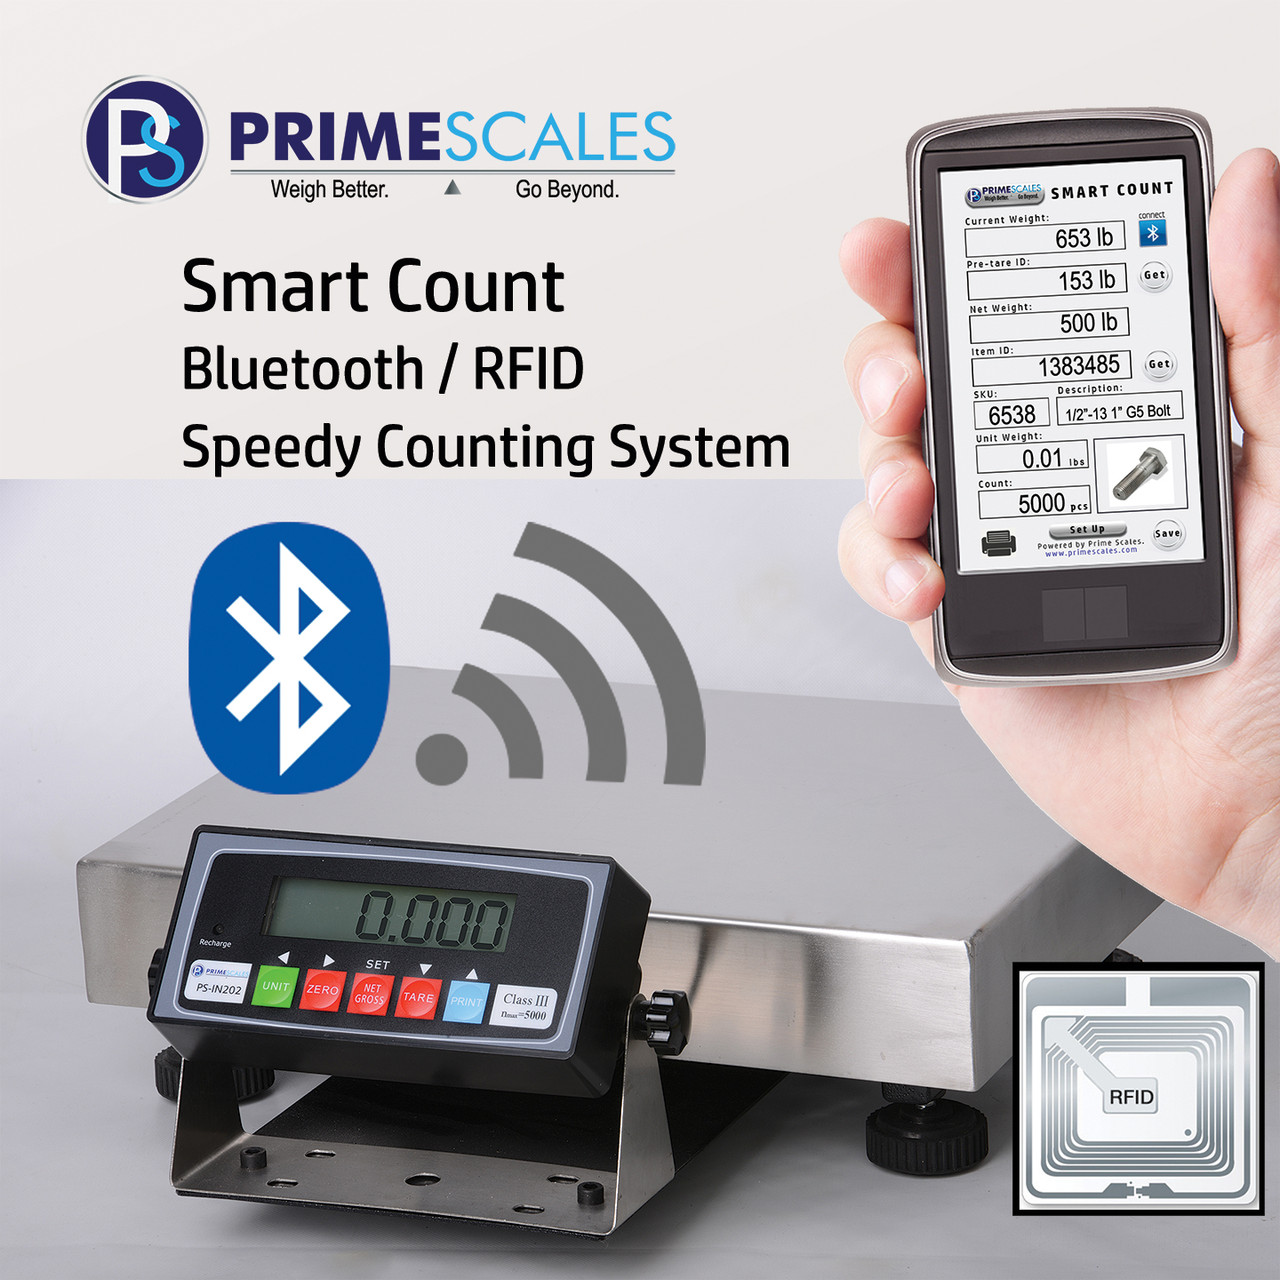 Smart Count Bluetooth / RFID Speedy Counting System - Prime Scales